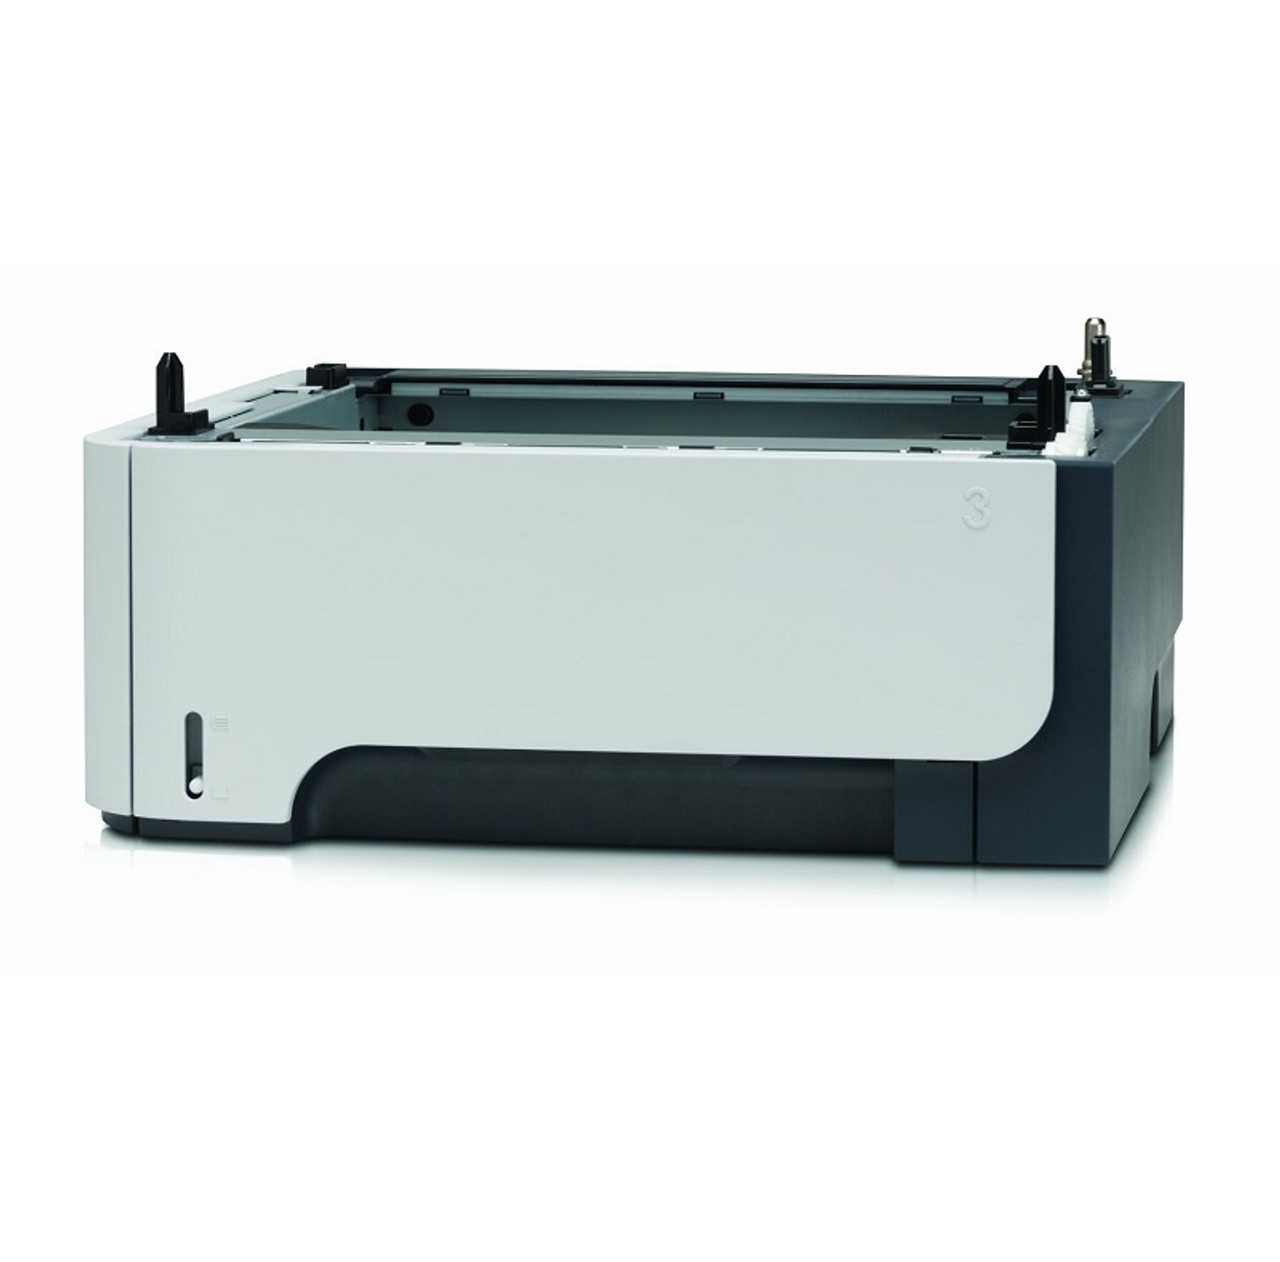 Q2485-60055 - HP 250-Sheets Paper Feeder Tray Assembly for LaserJet 1300 Series Printer (Refurbished / Grade-A)